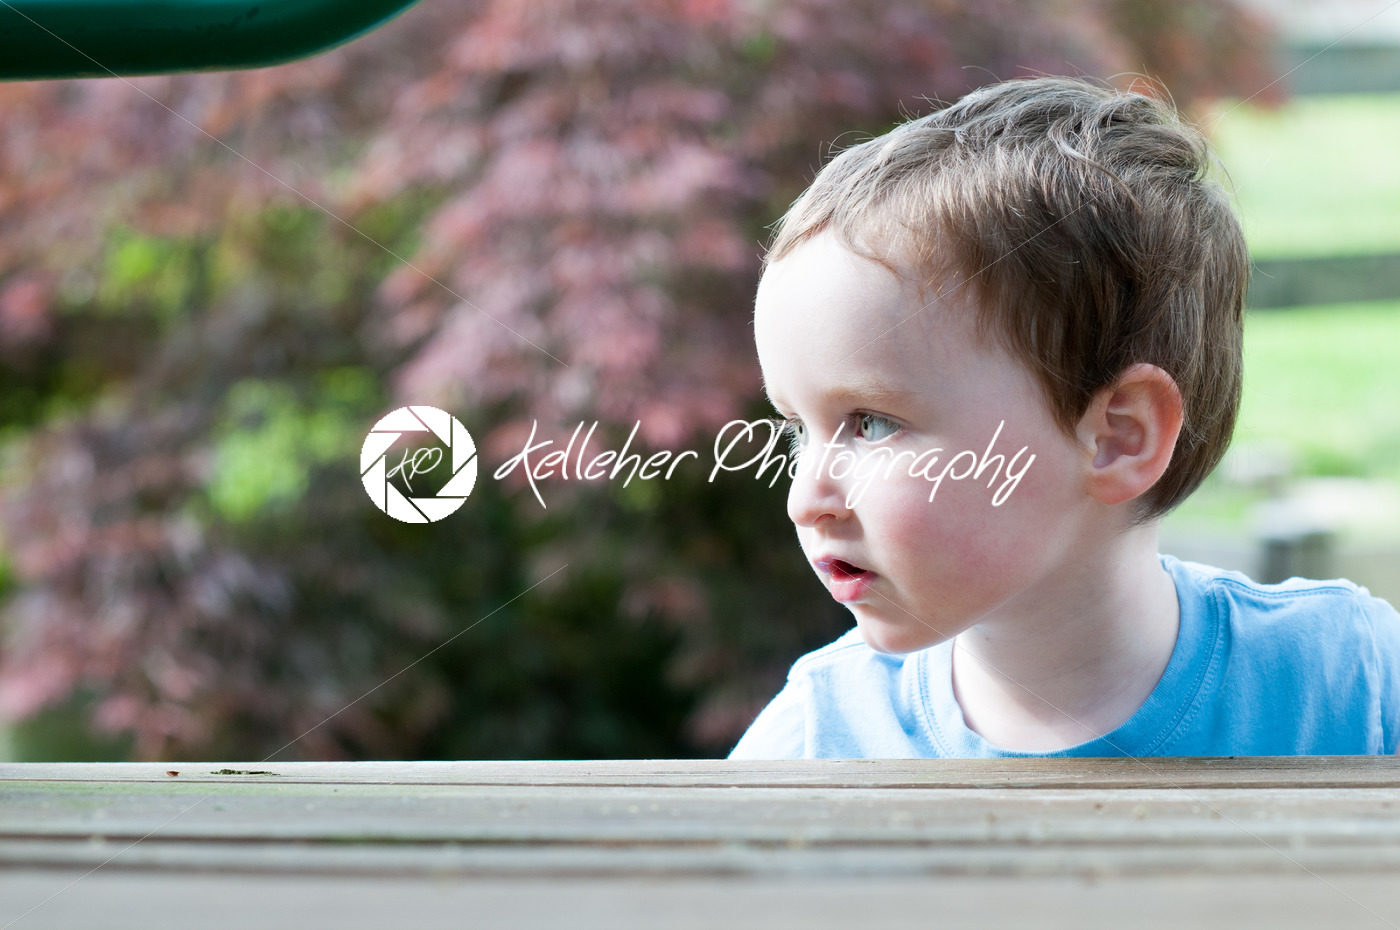 Young boy having fun on a swing set - Kelleher Photography Store